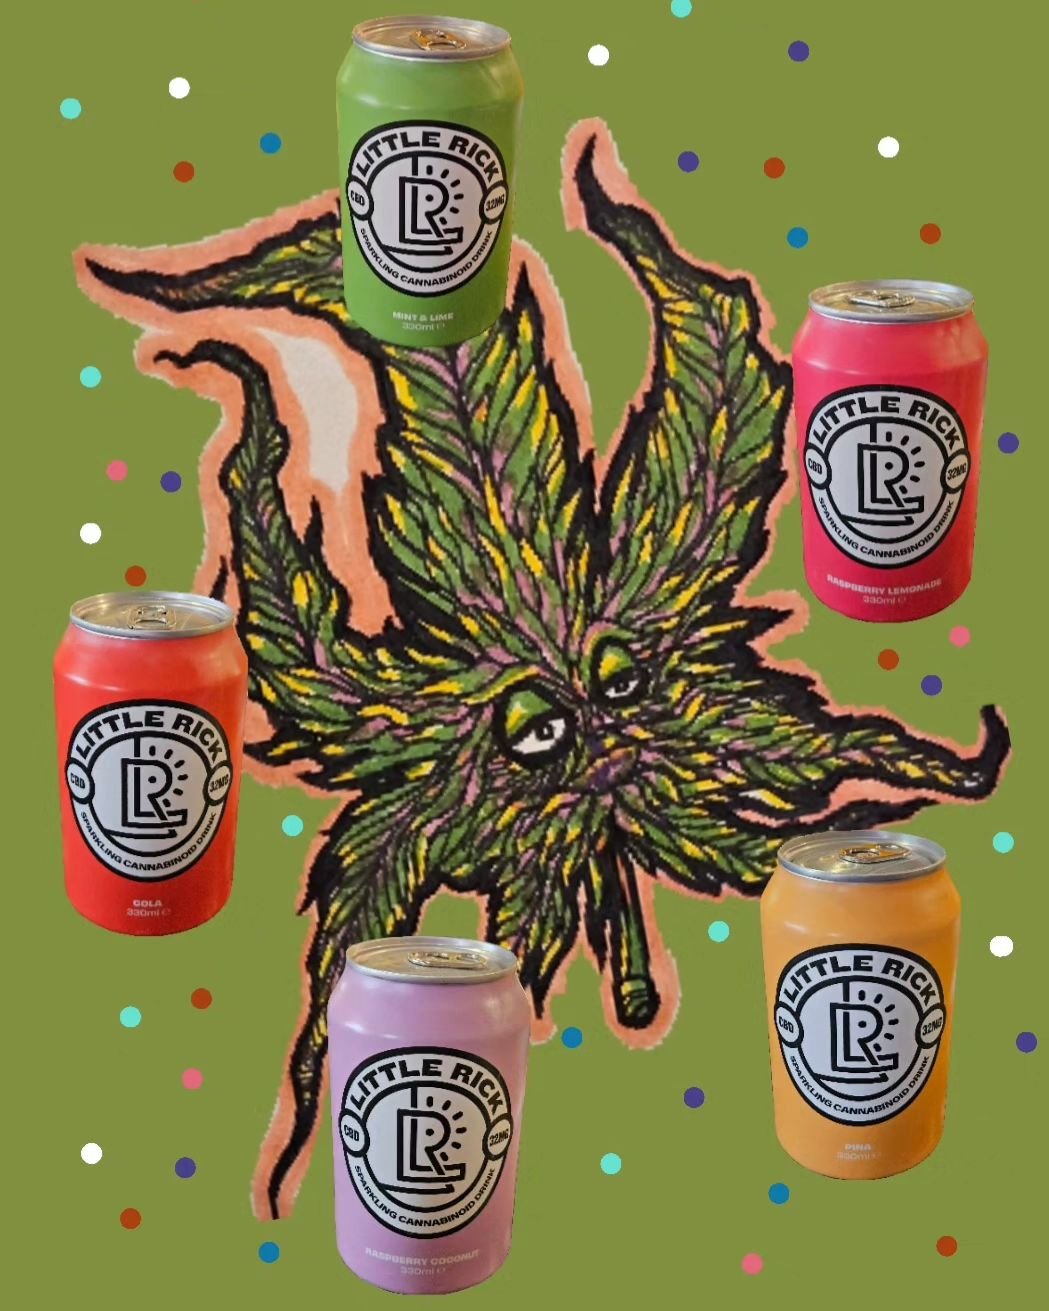 Have a refreshing CBD drink in the warmer season; Little Rick's cans have 32MG of CBD inside mixed with some juicy flavours to choose from! 

🥥 Pina 
🍋 Raspberry Lemonade
🧉 Cola
🫐 Raspberry Coconut
🍃 Mint Lime 

&pound;2.90 each! 

Available in 